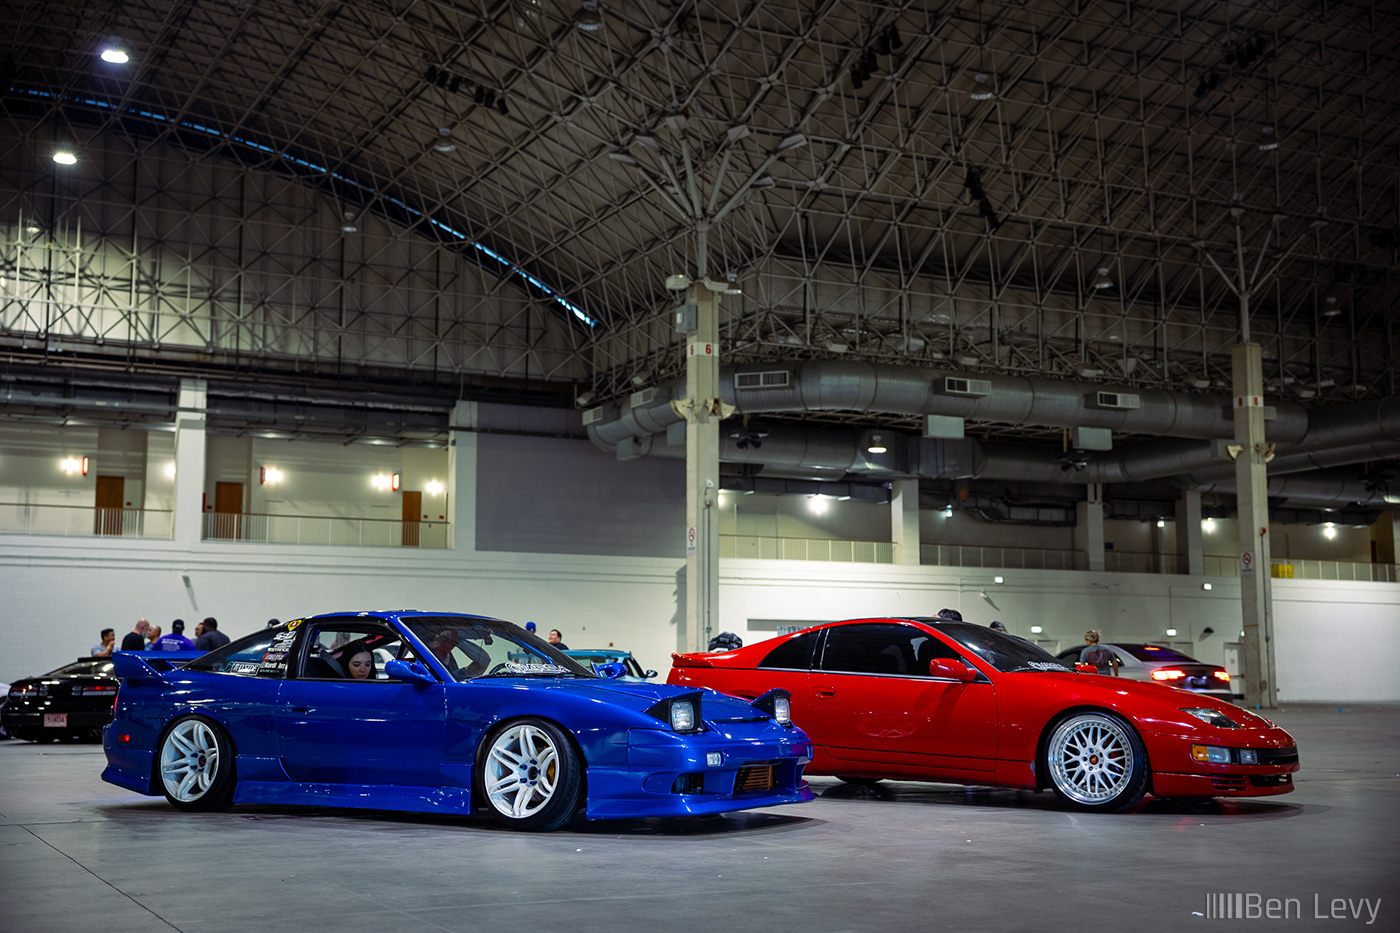 Nissan 240SX and 300ZX from Omega Auto Service in Elgin